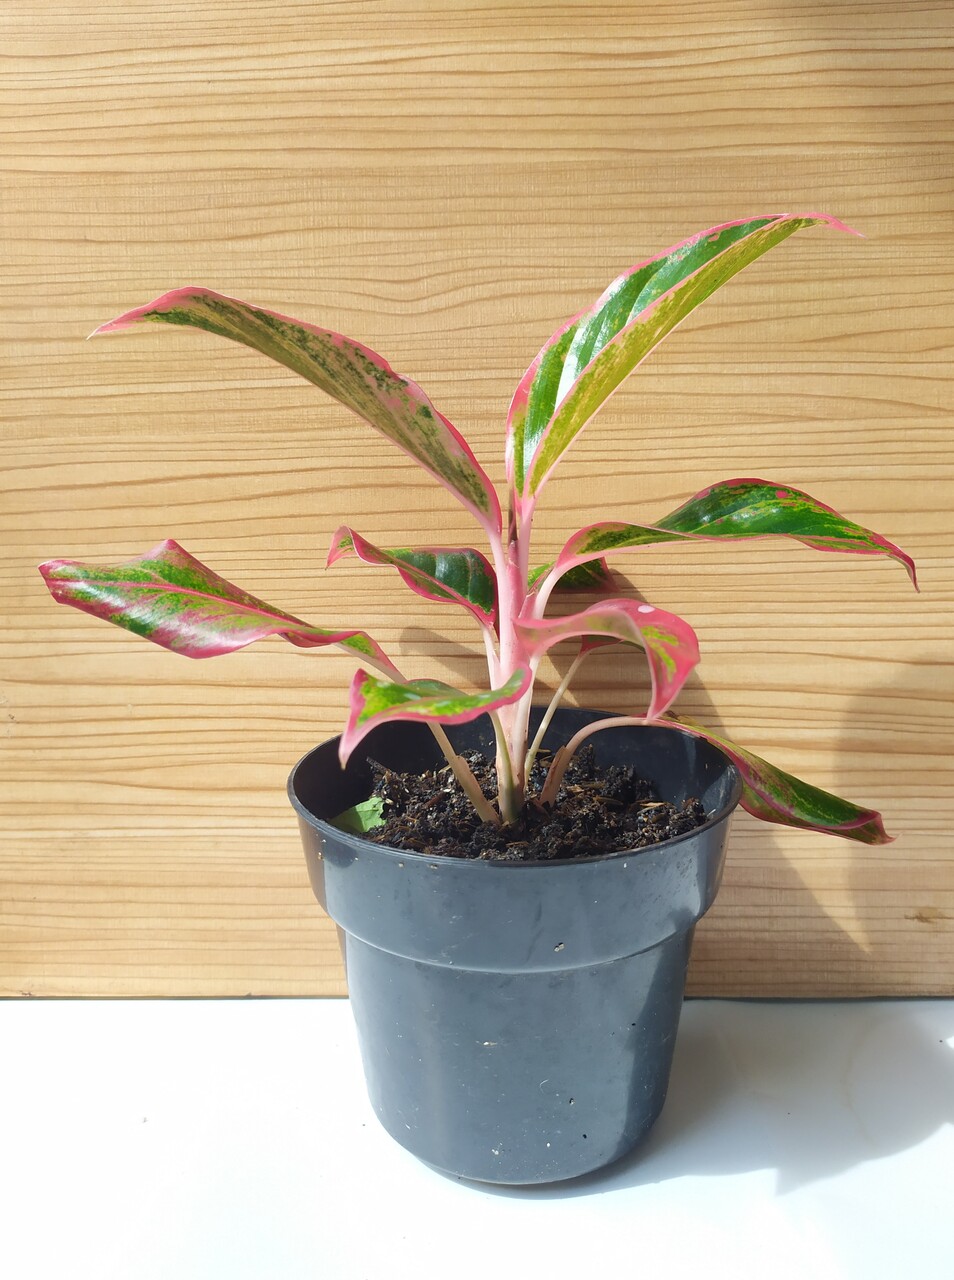 Image of a Chinese evergreen plant.